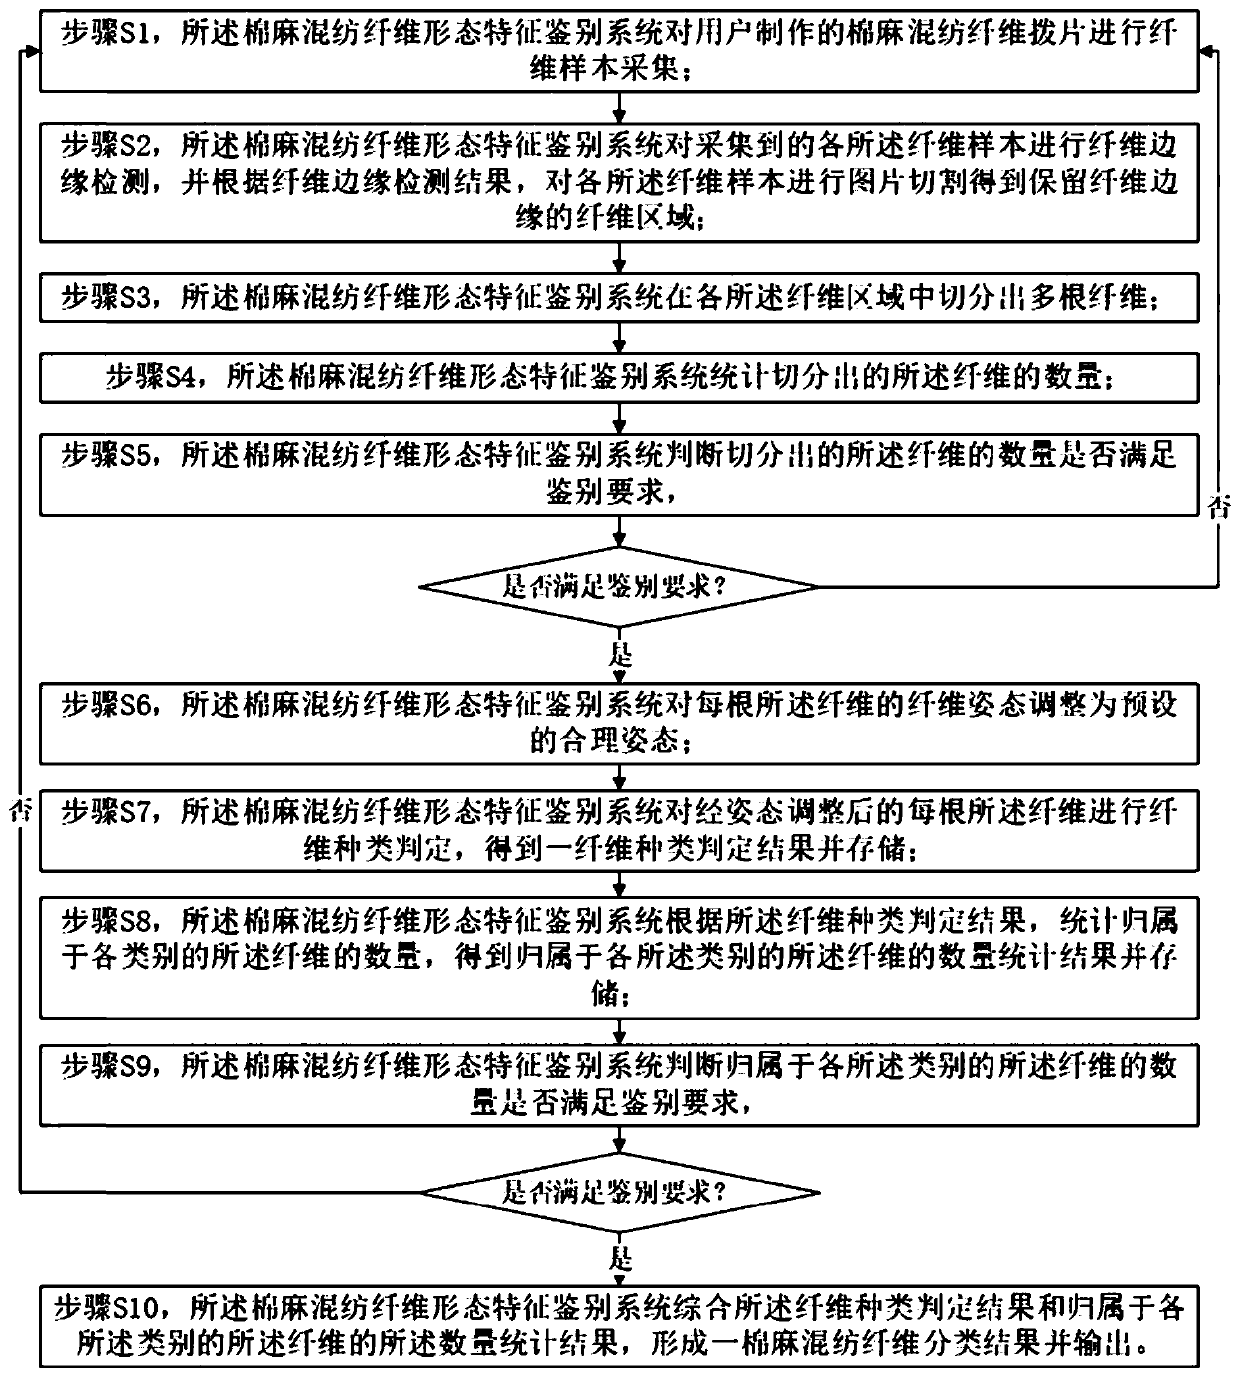 Cotton and linen blend fiber morphological characteristic identification system and identification method